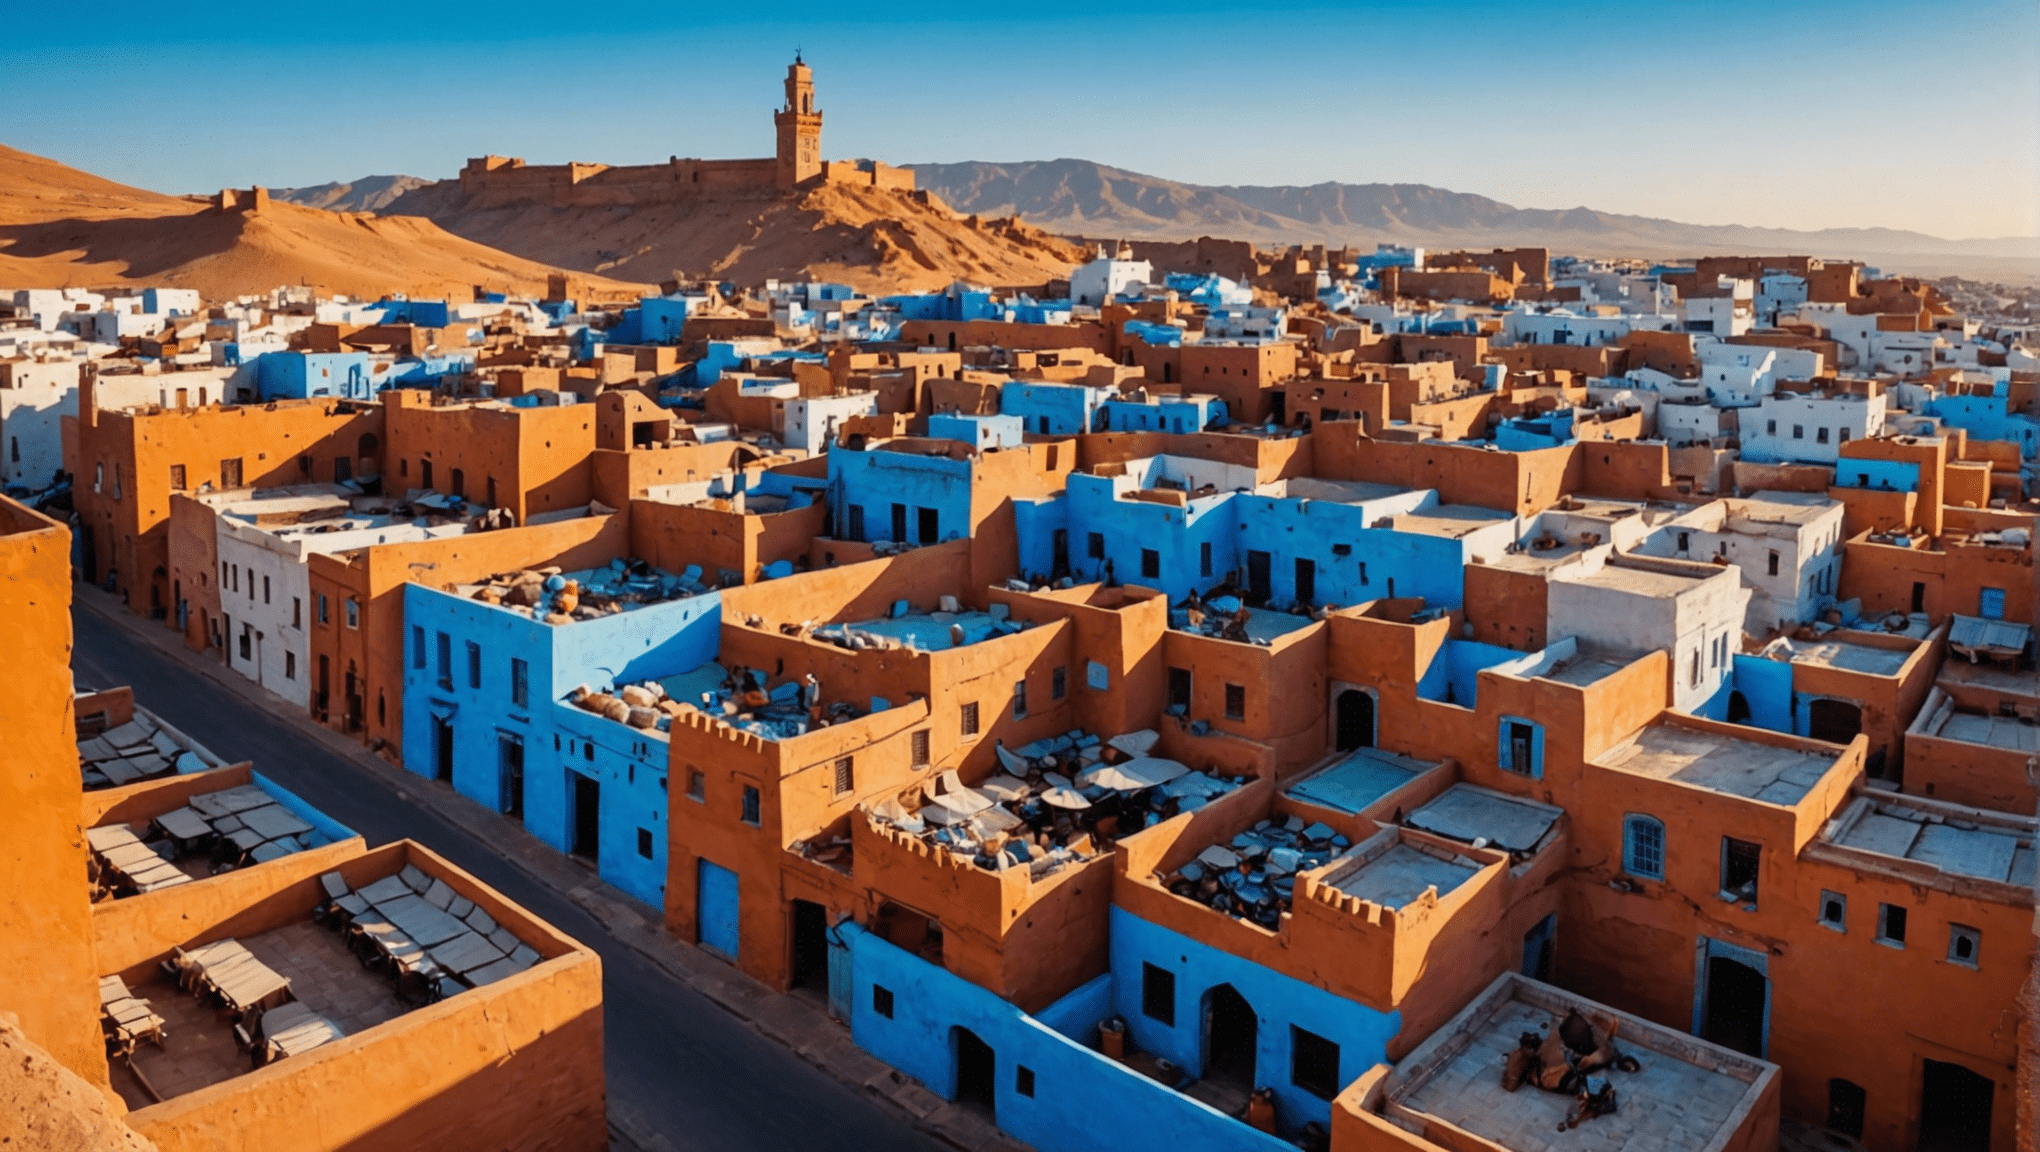 discover the most breathtaking movie locations in morocco and get inspired to visit these stunning places for your next adventure.